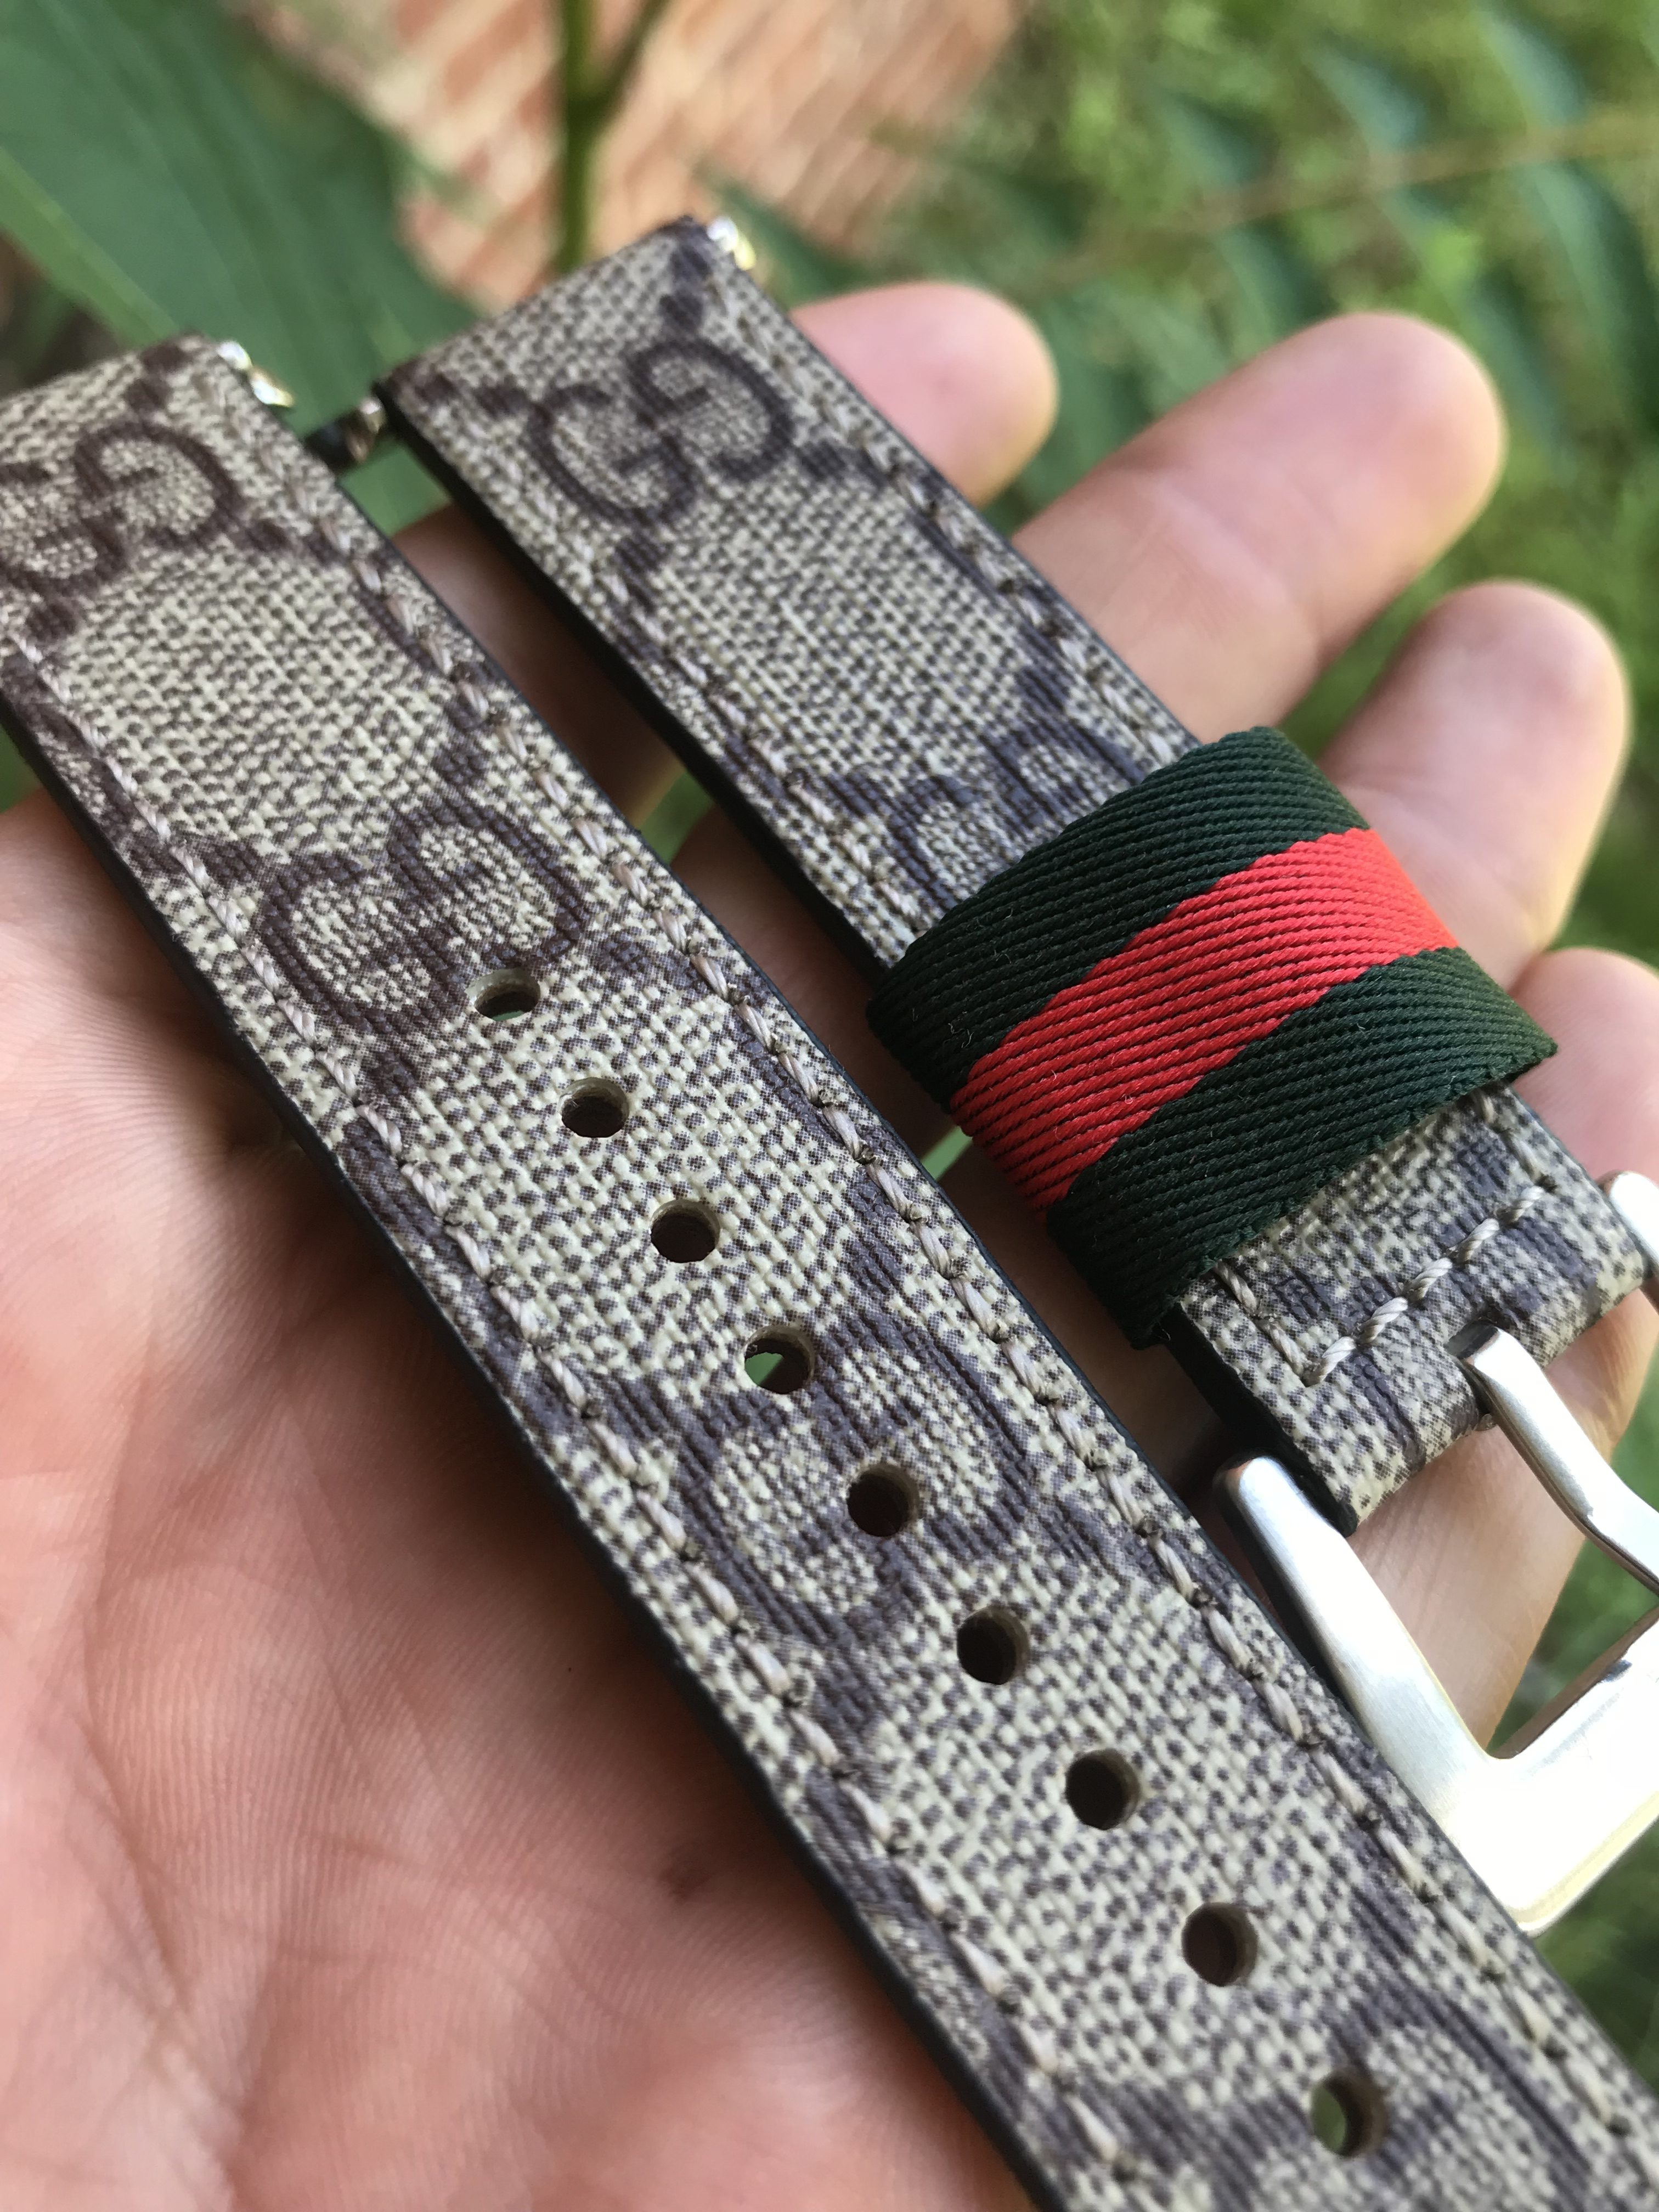 Authentic Gucci Apple Watch Band 